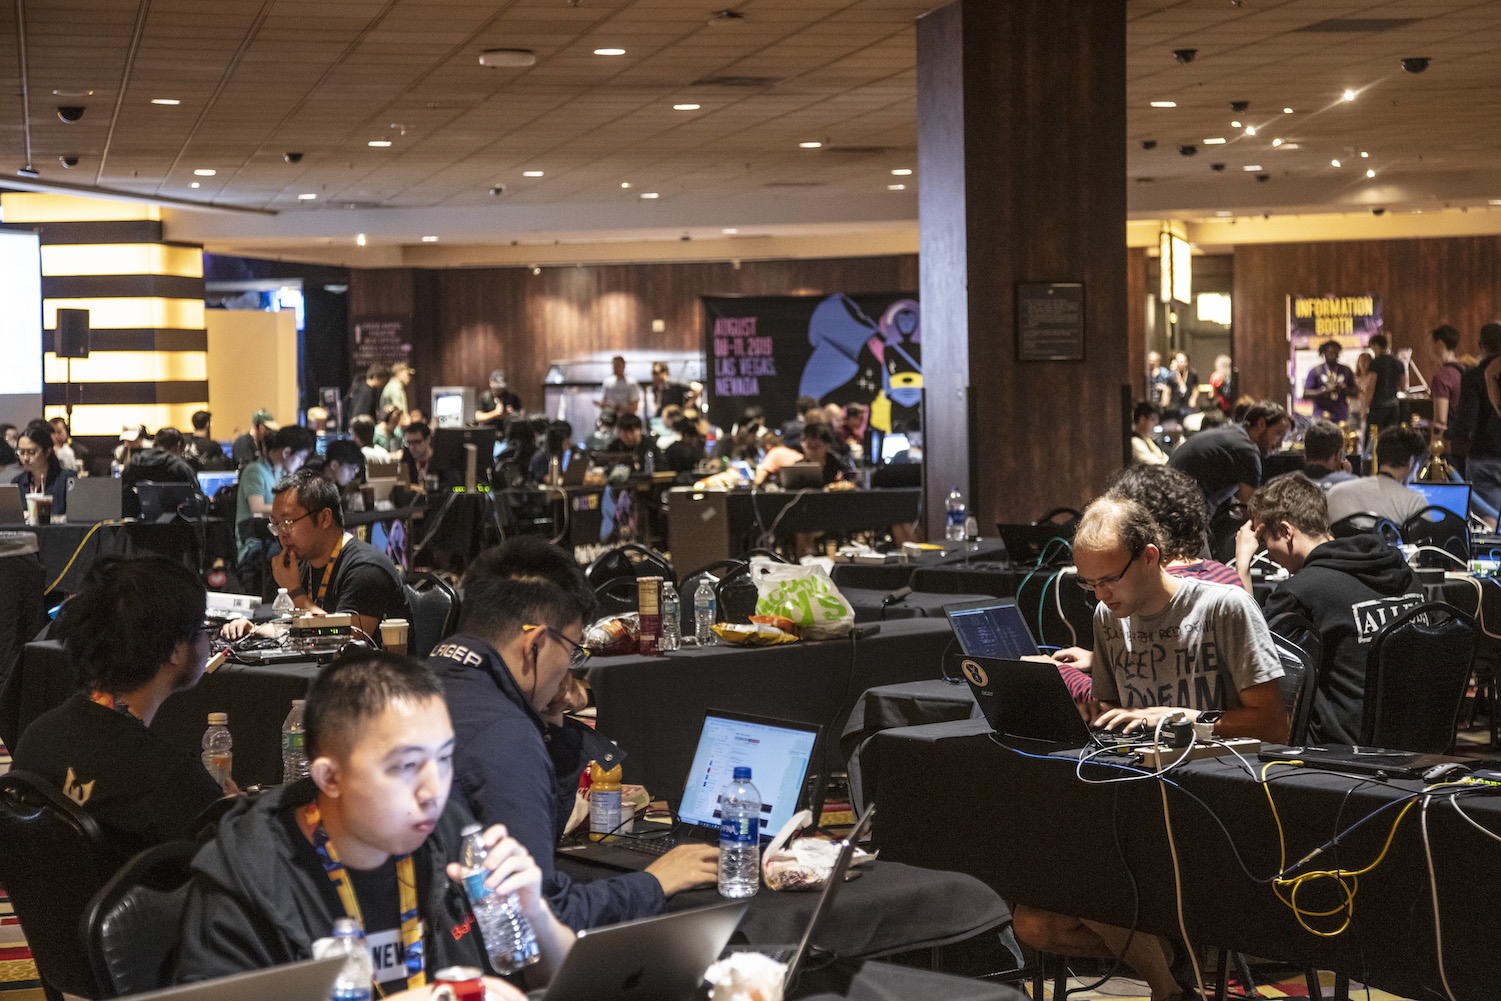 DEF CON27 CTF Participants, faculty and staff from multiple institutions